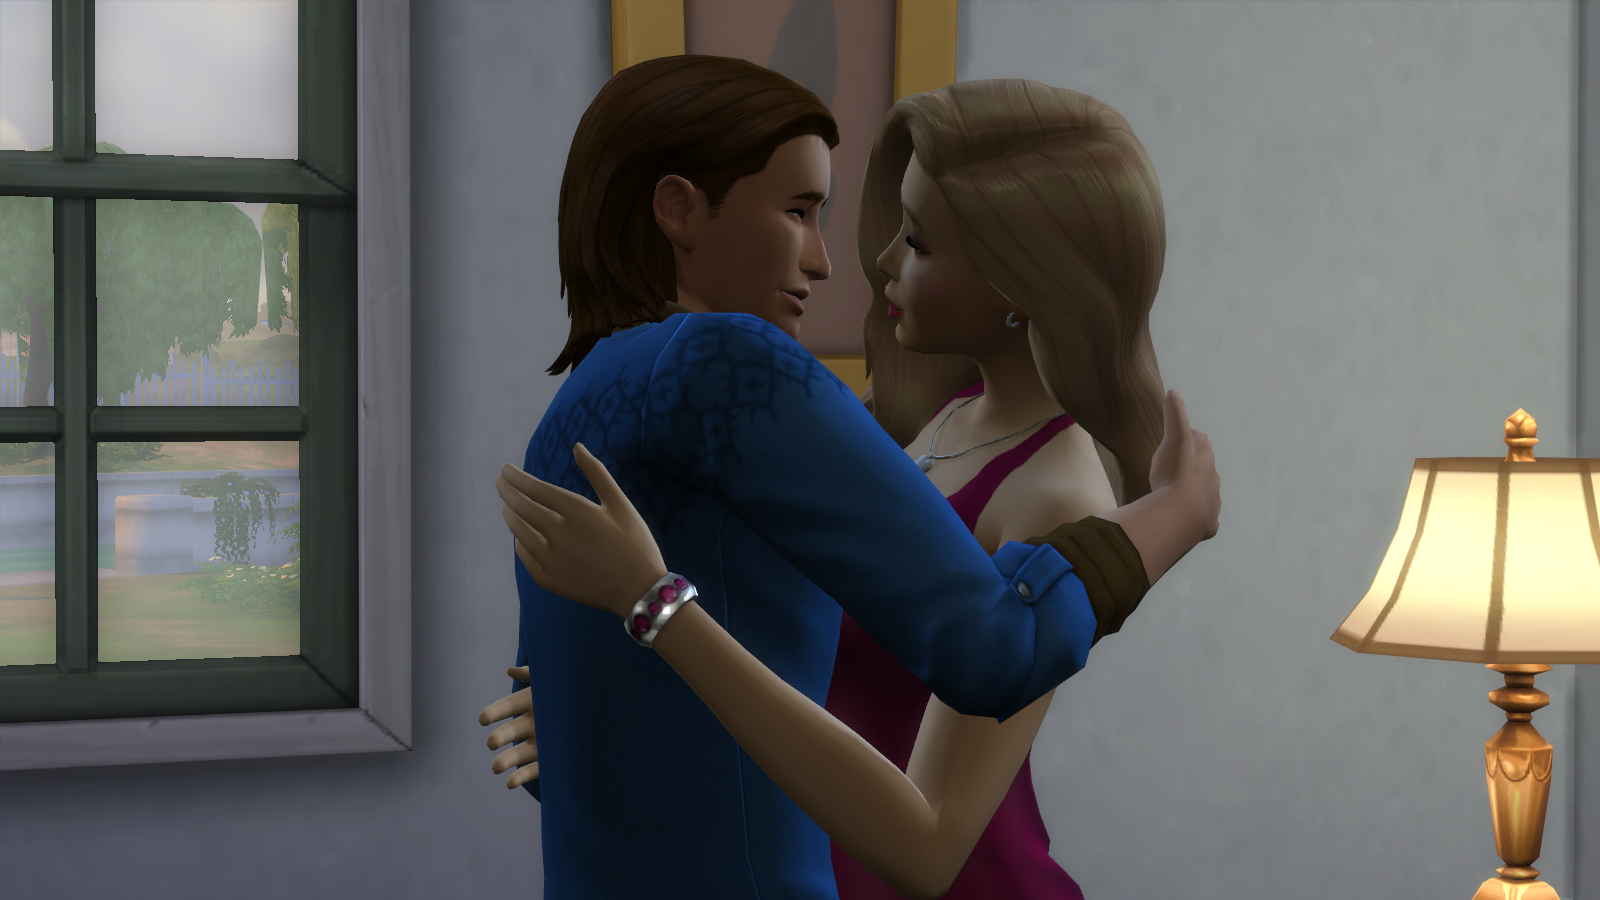 Post your pics of Love — The Sims Forums